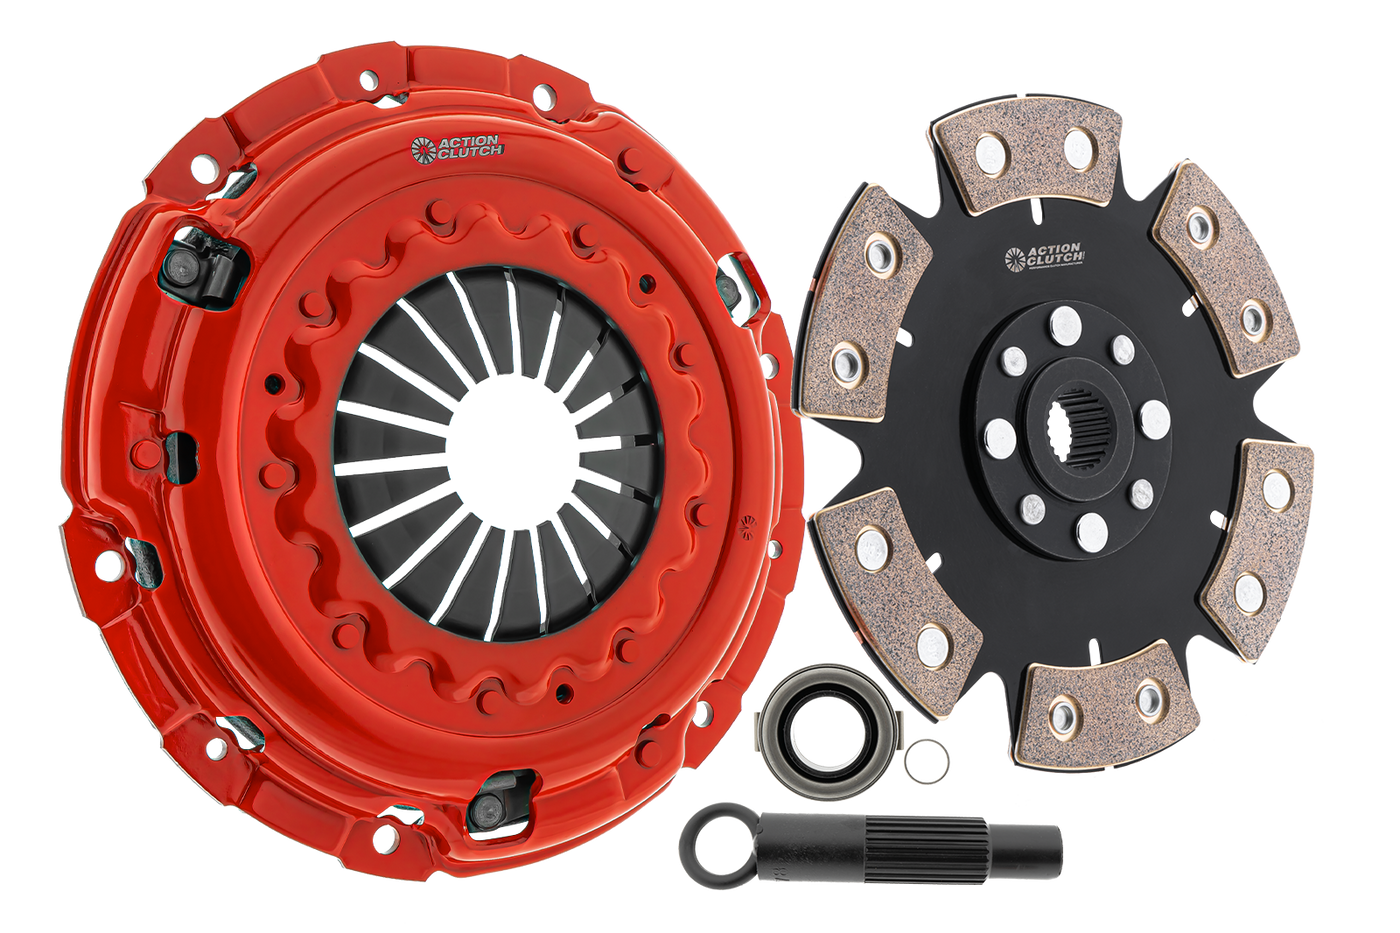 Stage 6 Clutch Kit (2MD) for Nissan 300ZX 1984-1988 3.0L (VG30E) Non-Turbo